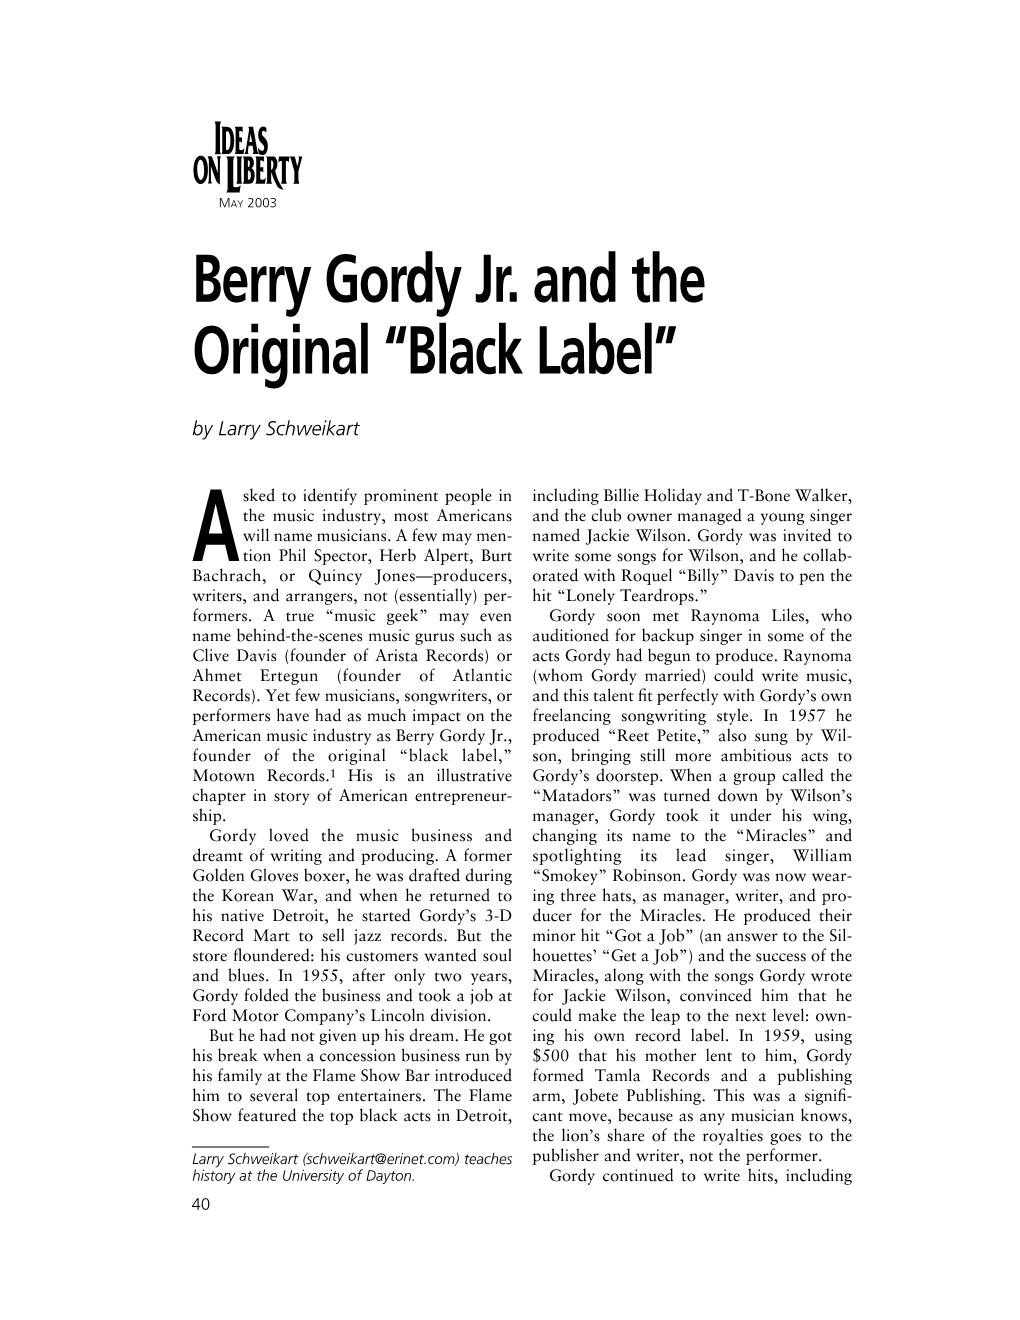 Berry Gordy Jr. and the Original “Black Label” by Larry Schweikart